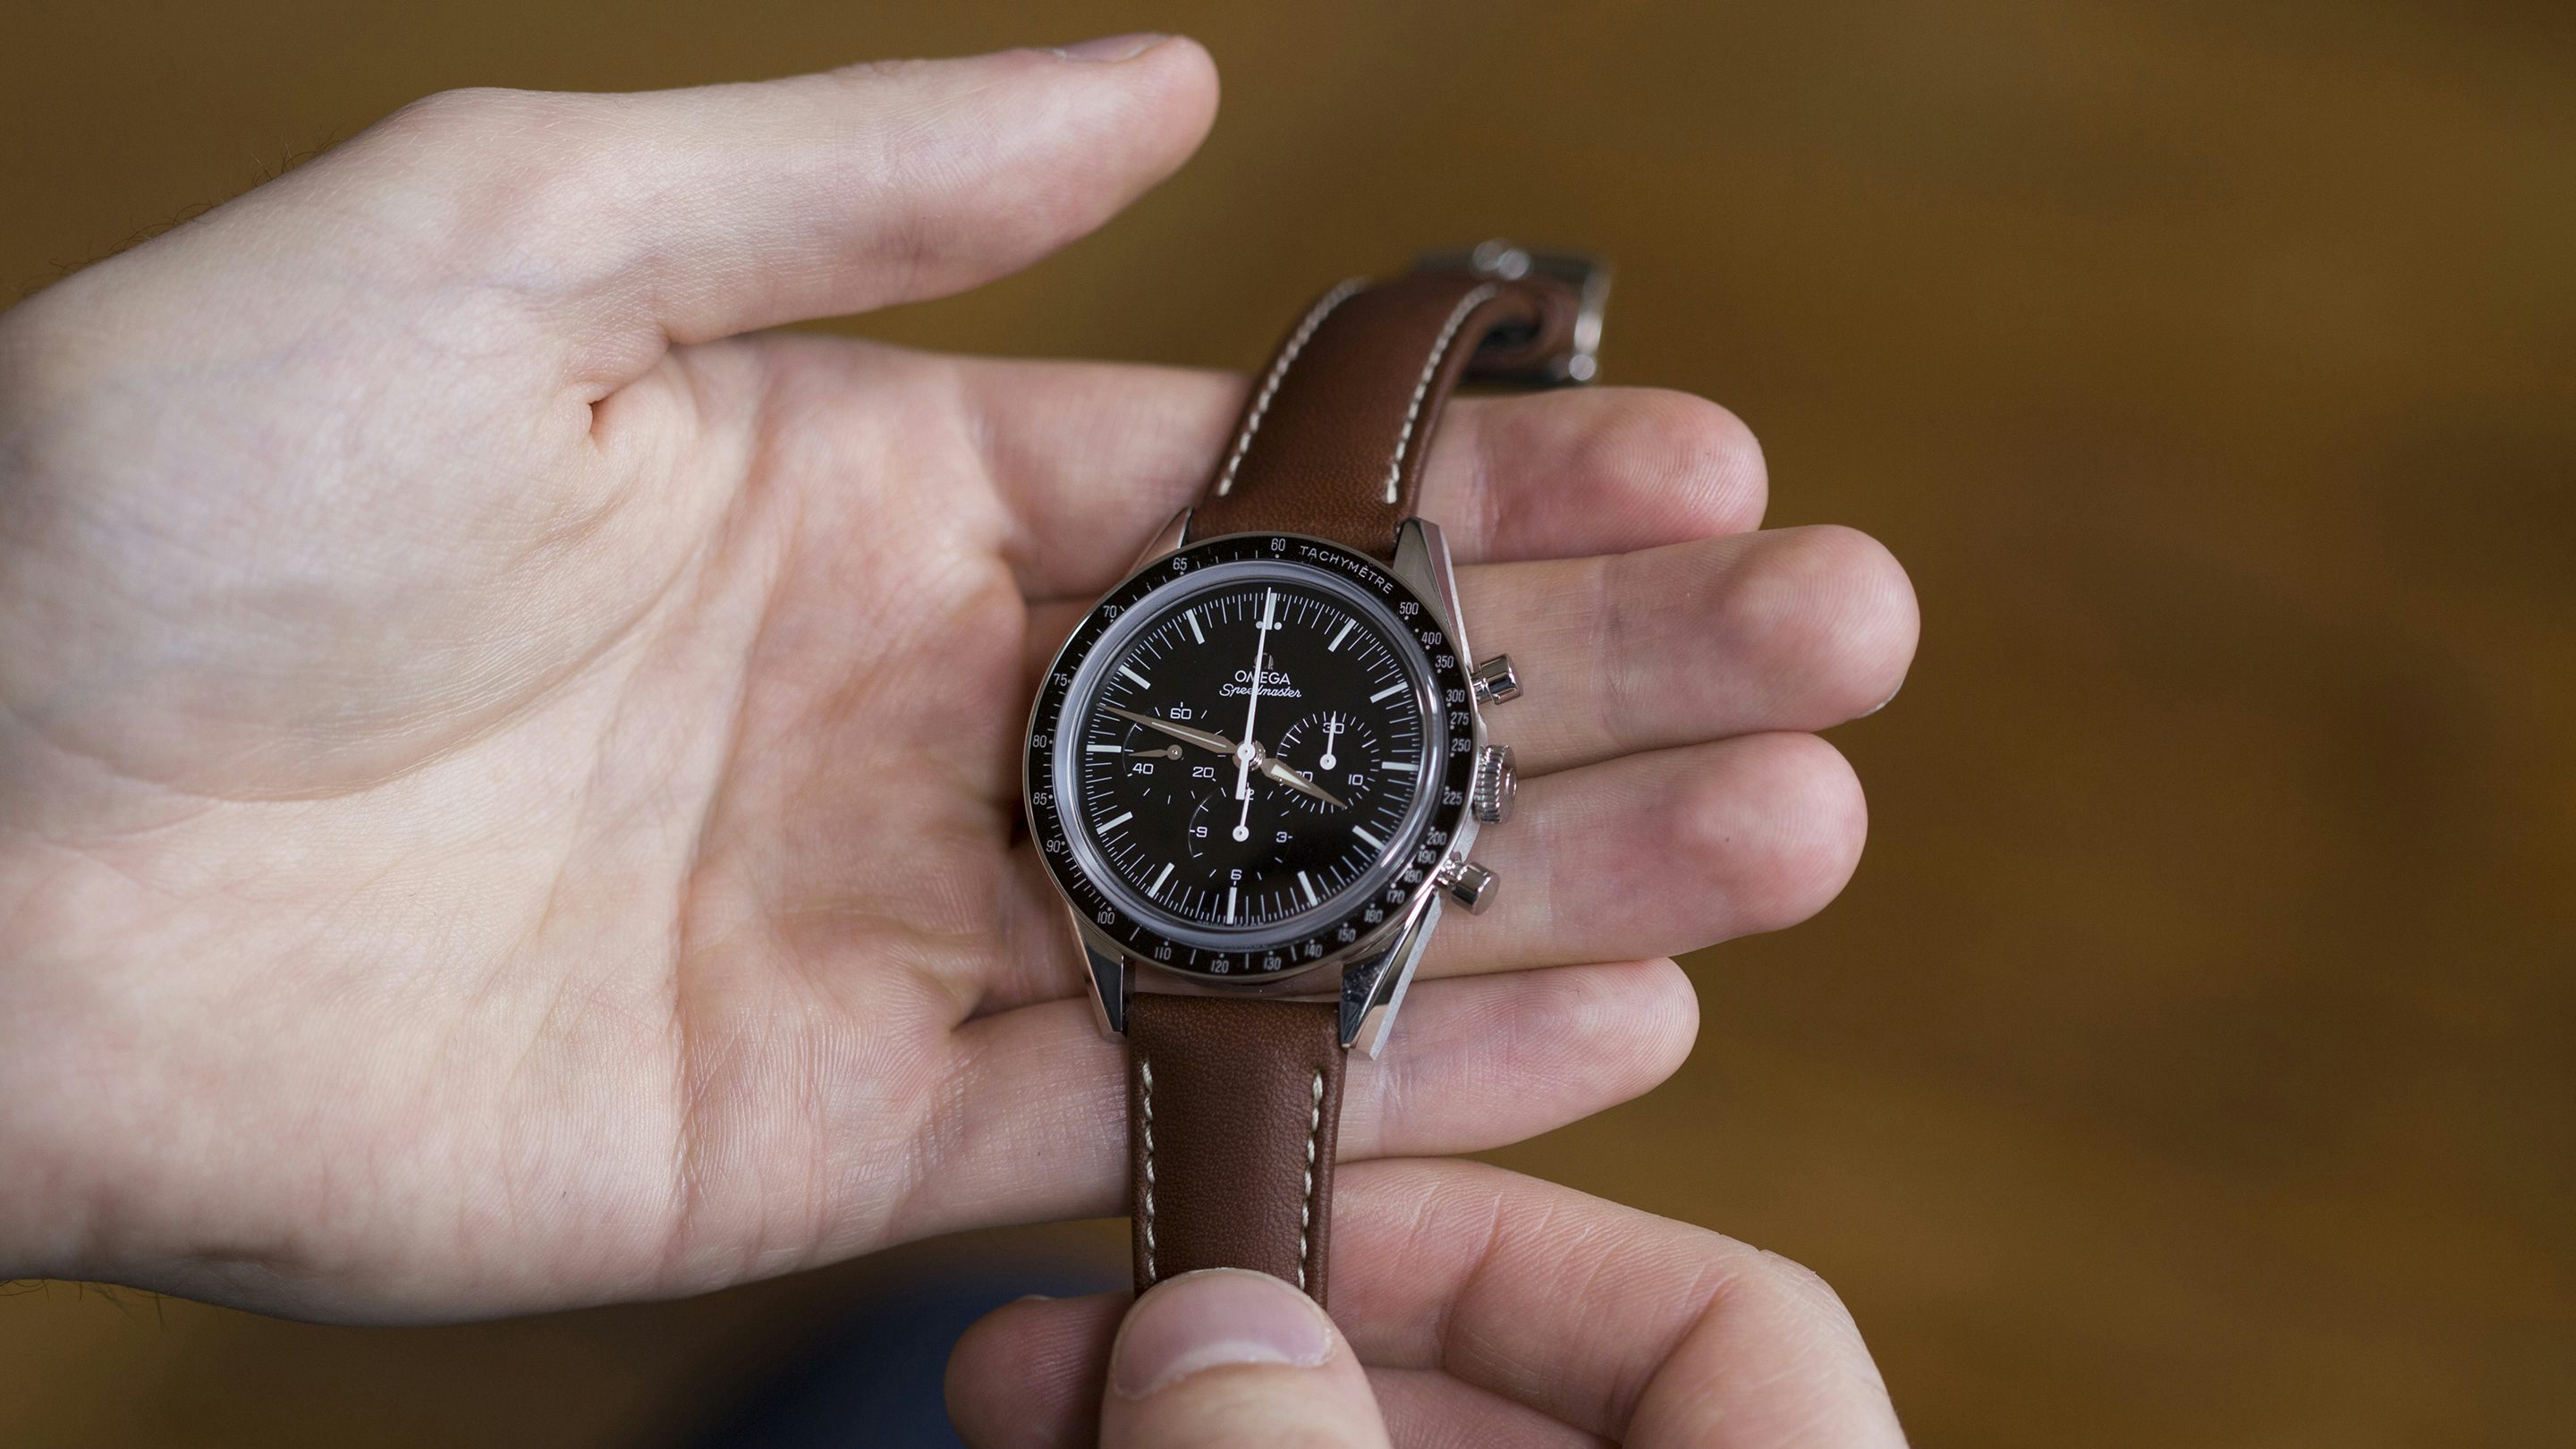 Hands-On: The Omega Speedmaster That Has Everyone Over The Moon - Hodinkee